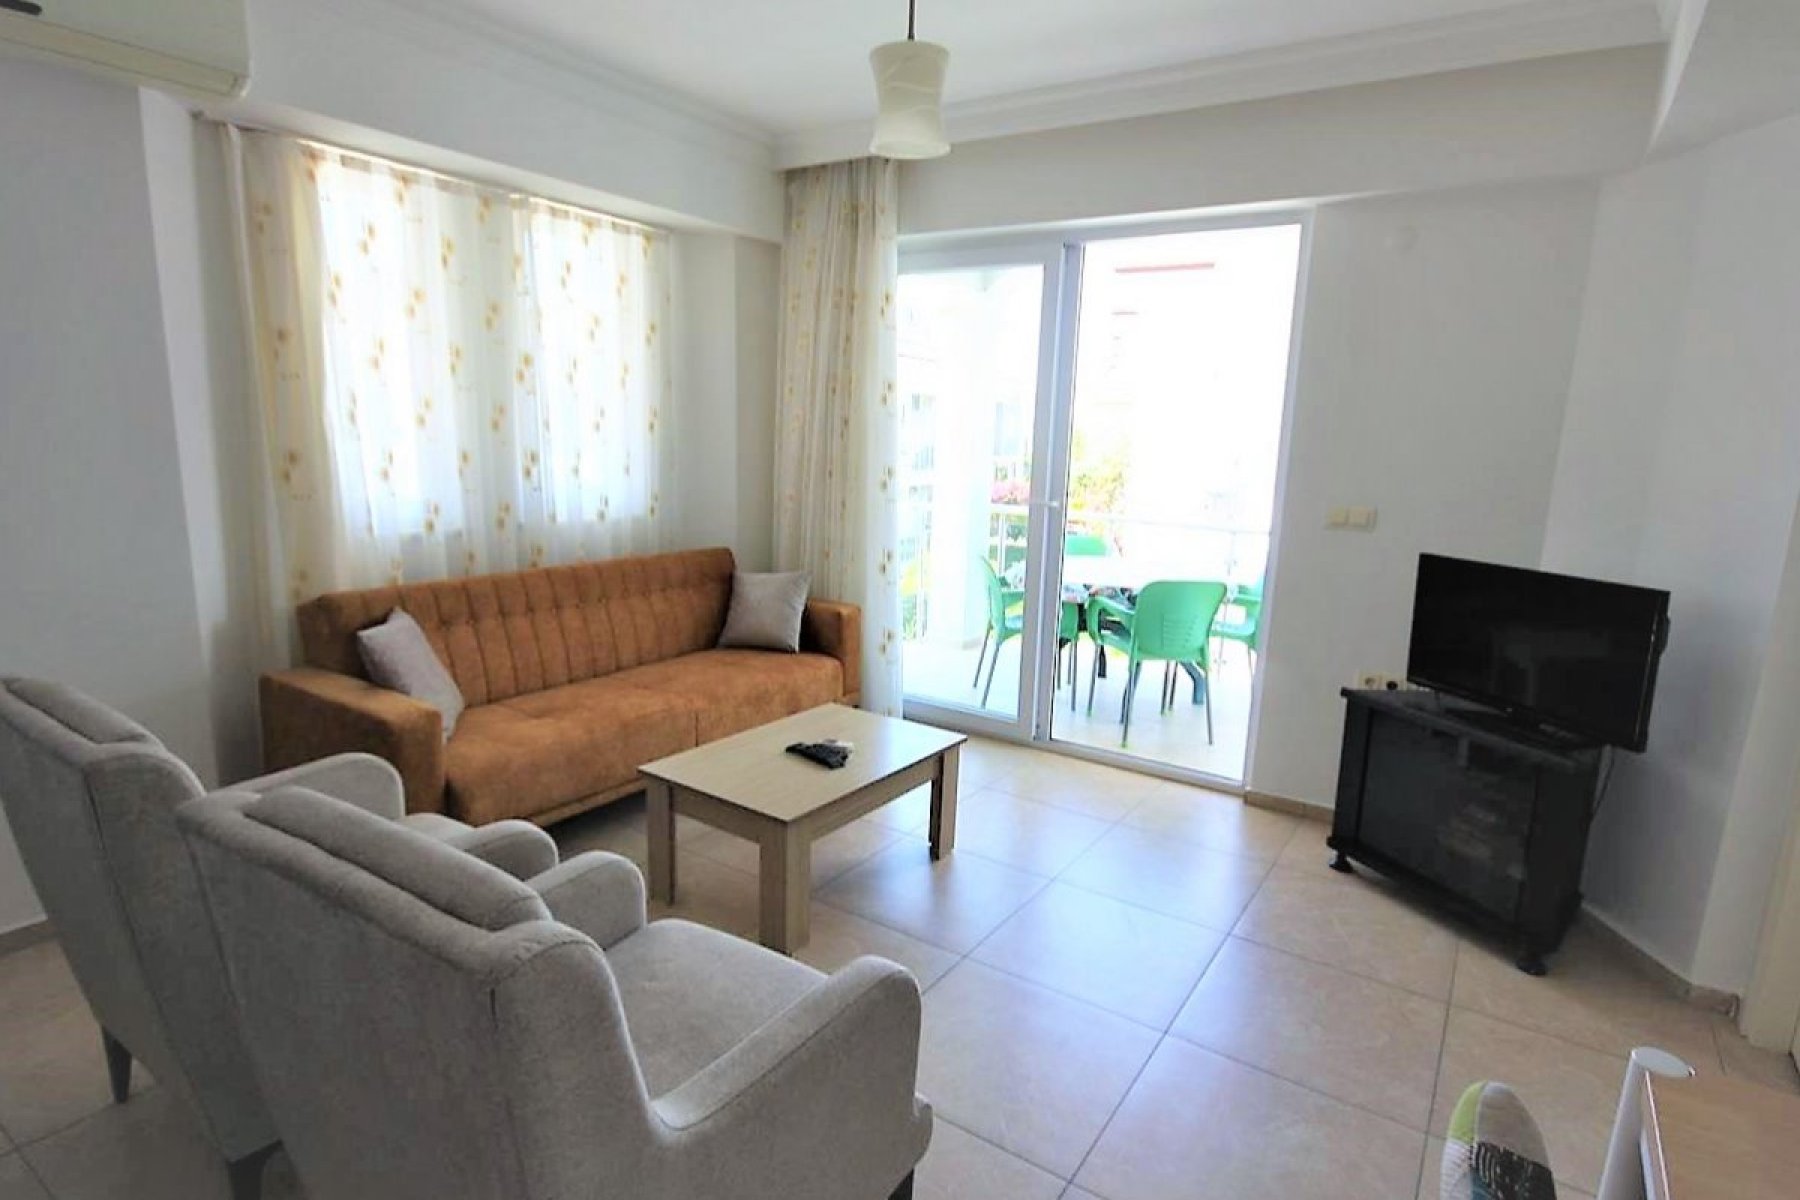 Legend A3 apartments apartment for rent in Calis